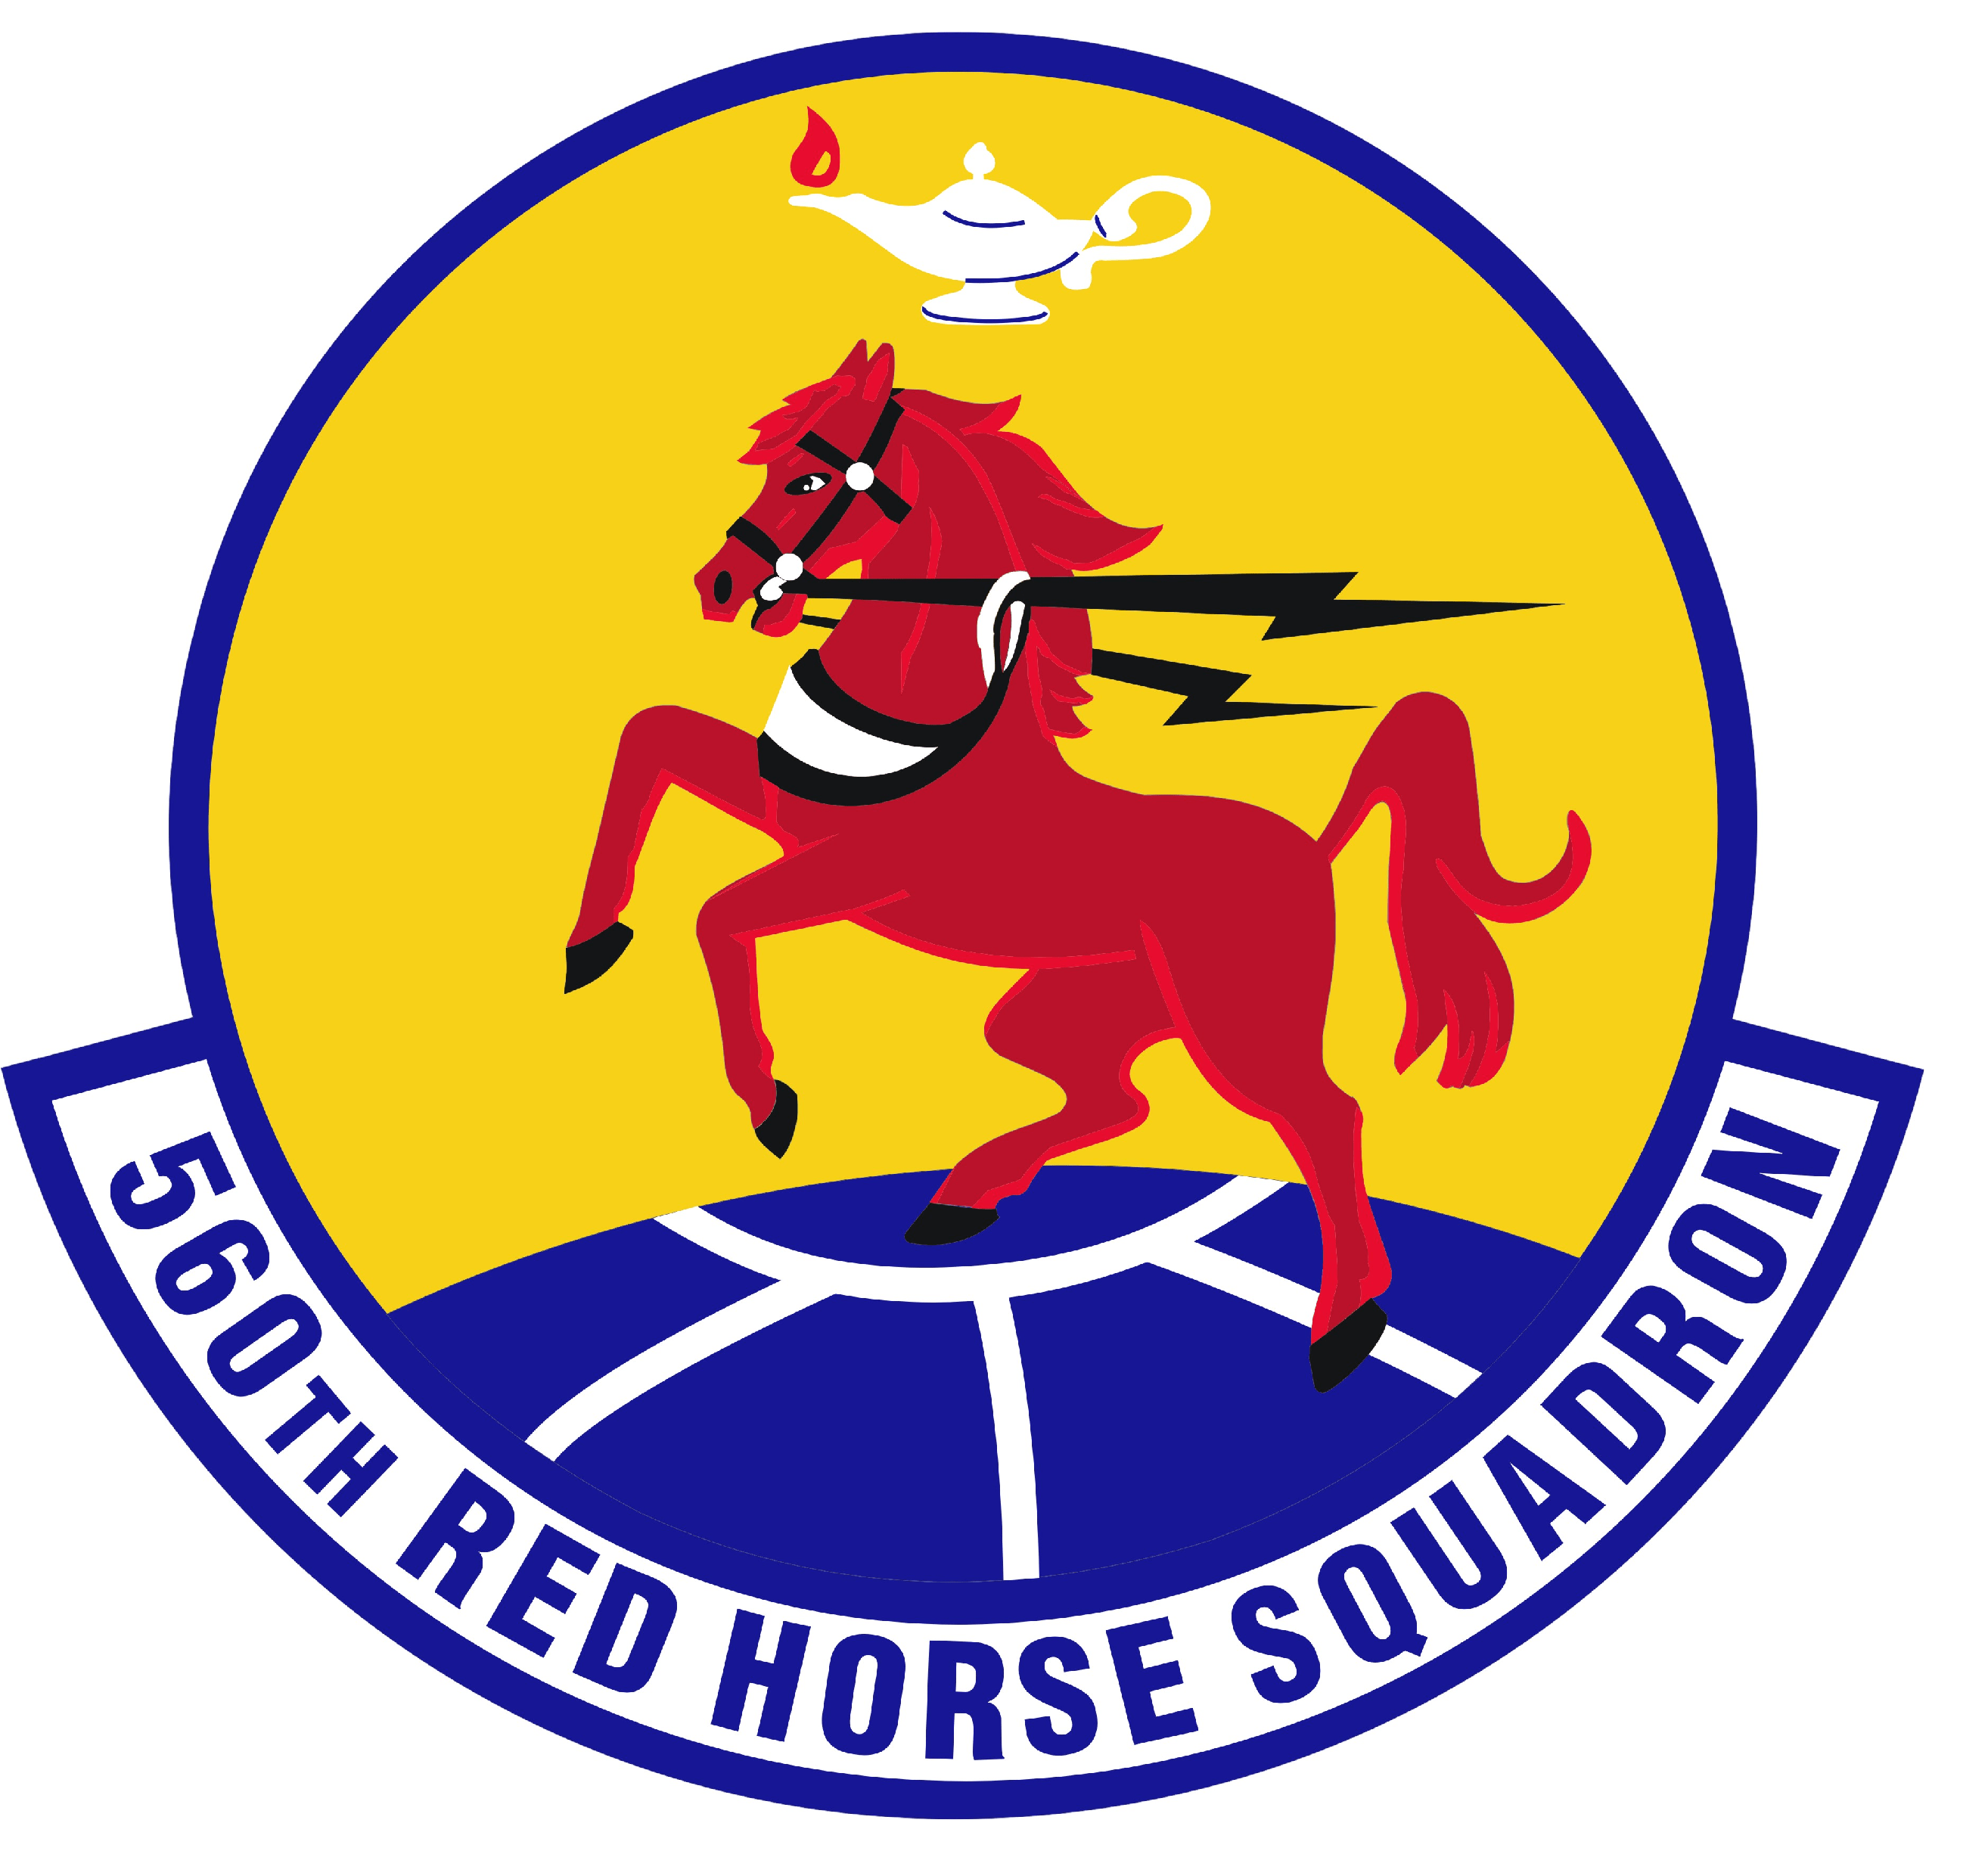 Red and Yellow Horse Logo - RED HORSE Sq emblem.png